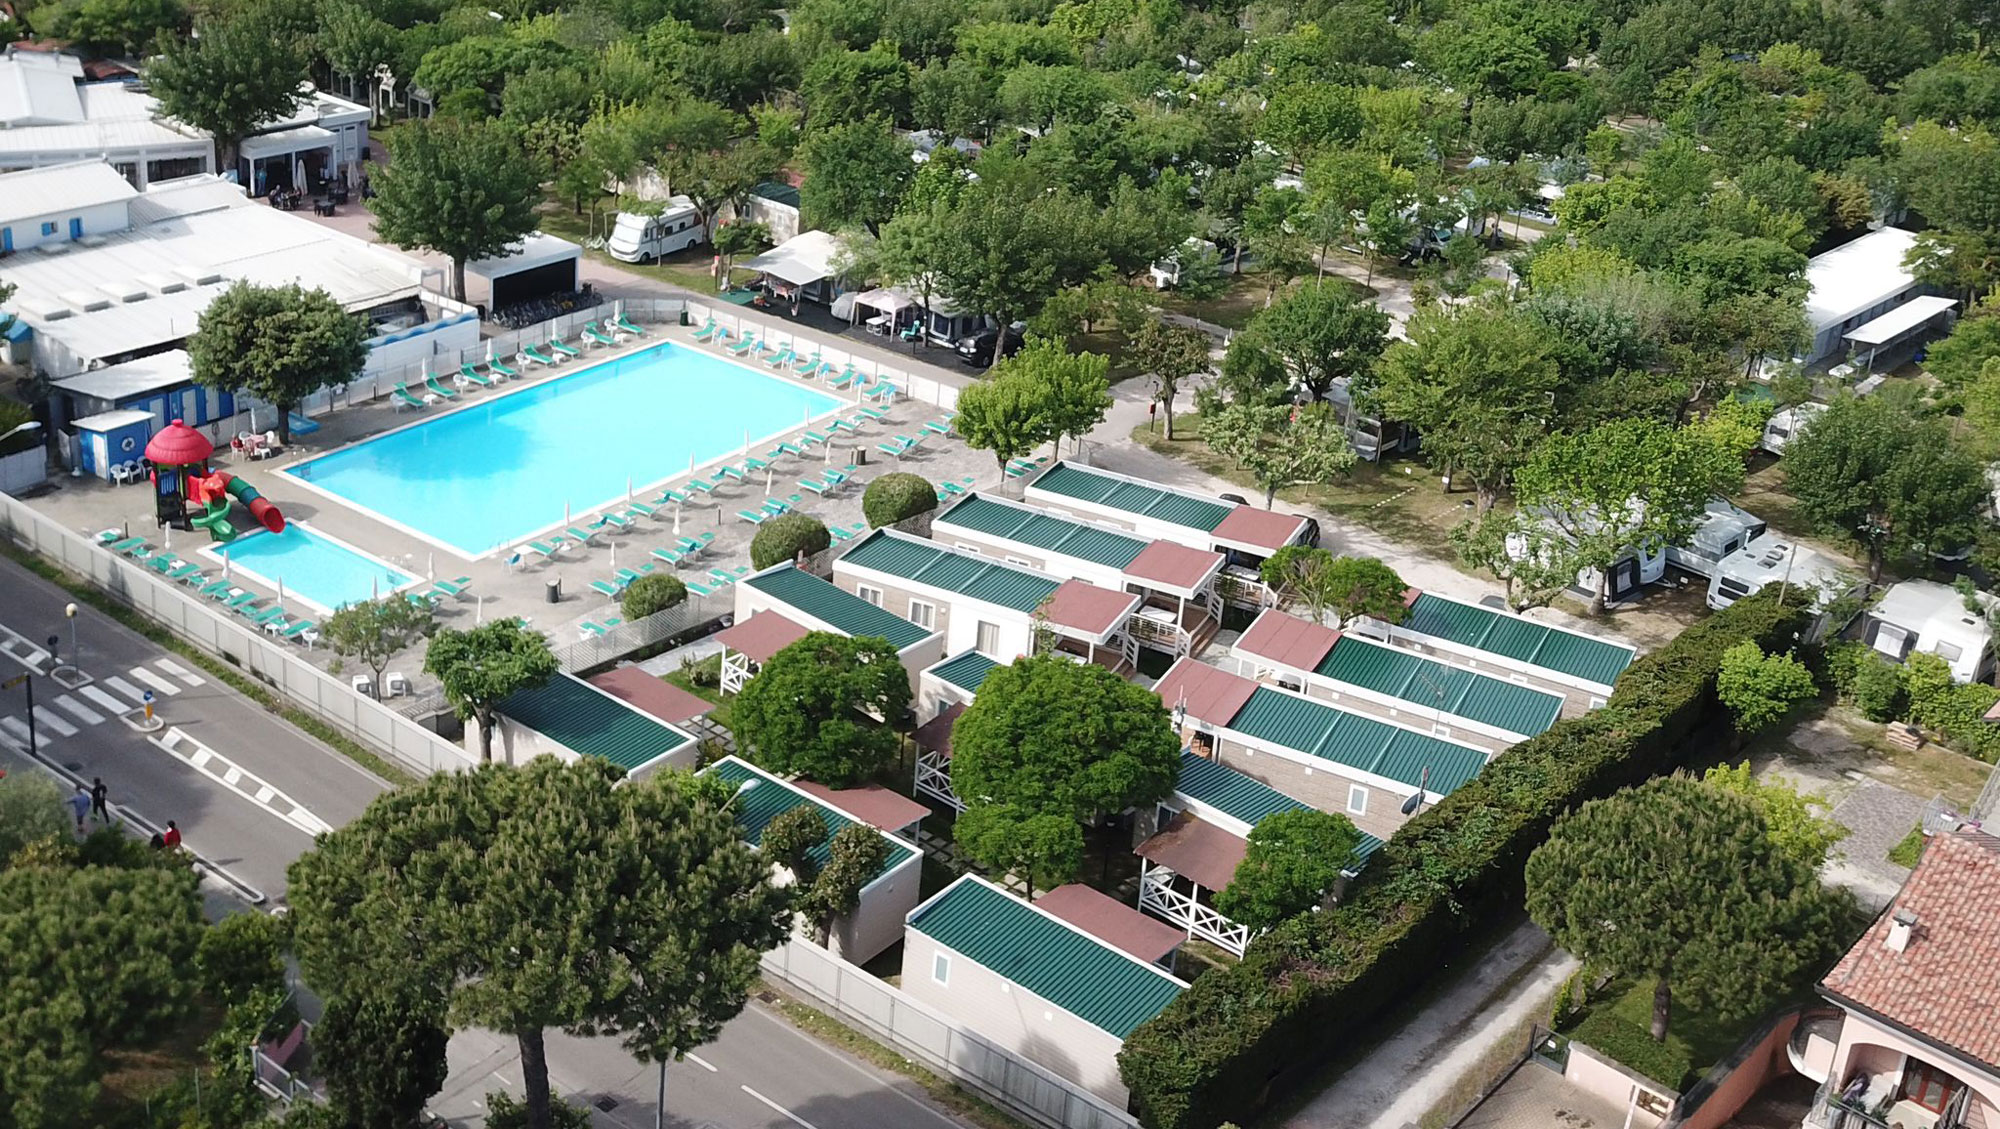 All the information you need about Adriatico Family Camping Village